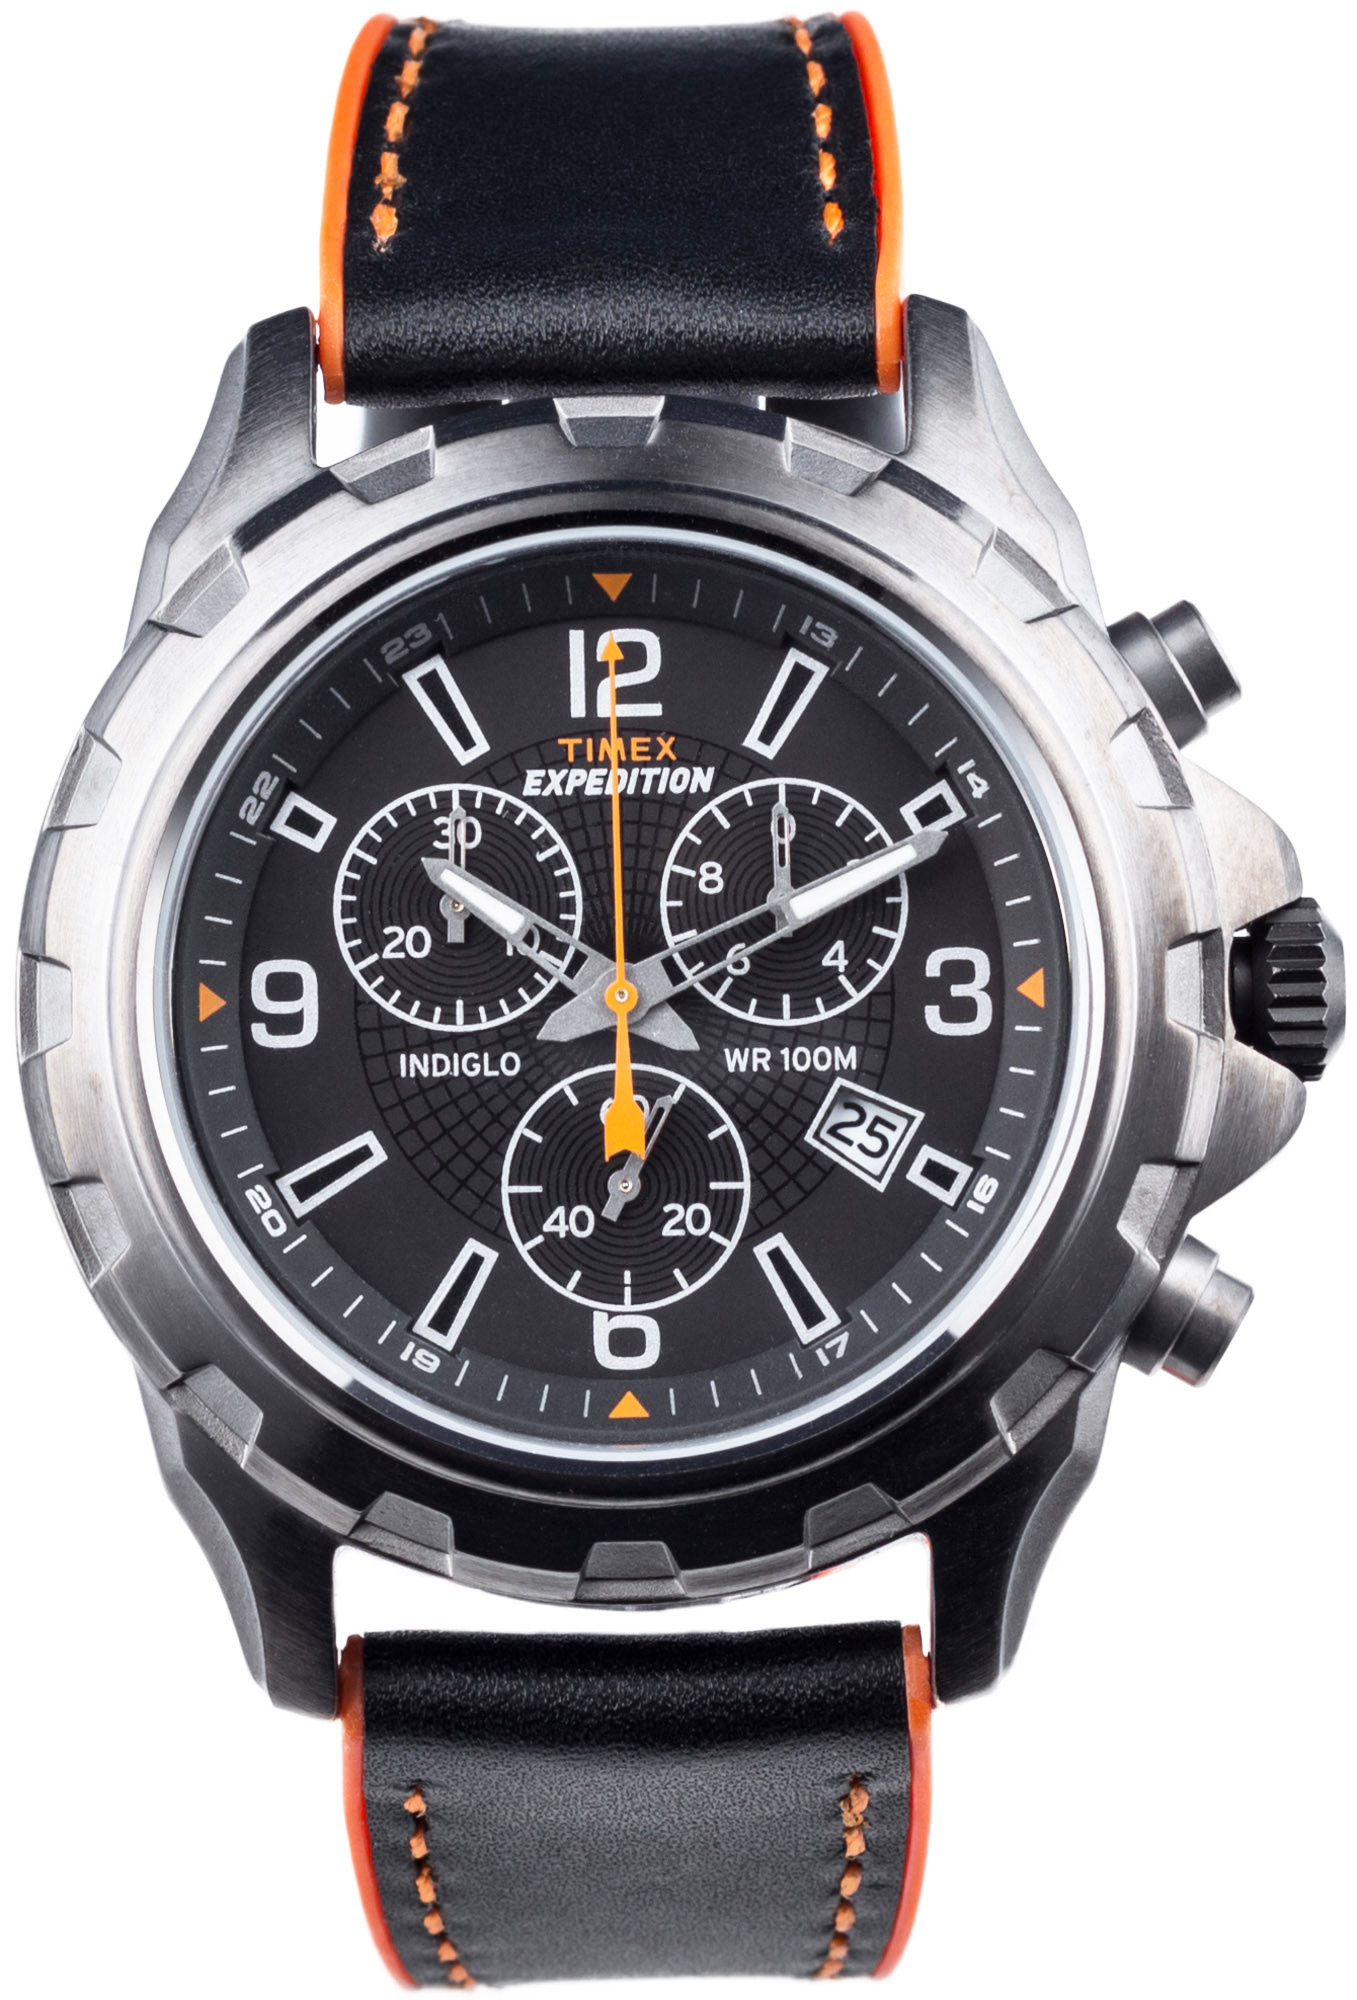 Timex T49987 - Expedition Chronograph Watch • Watchard.com